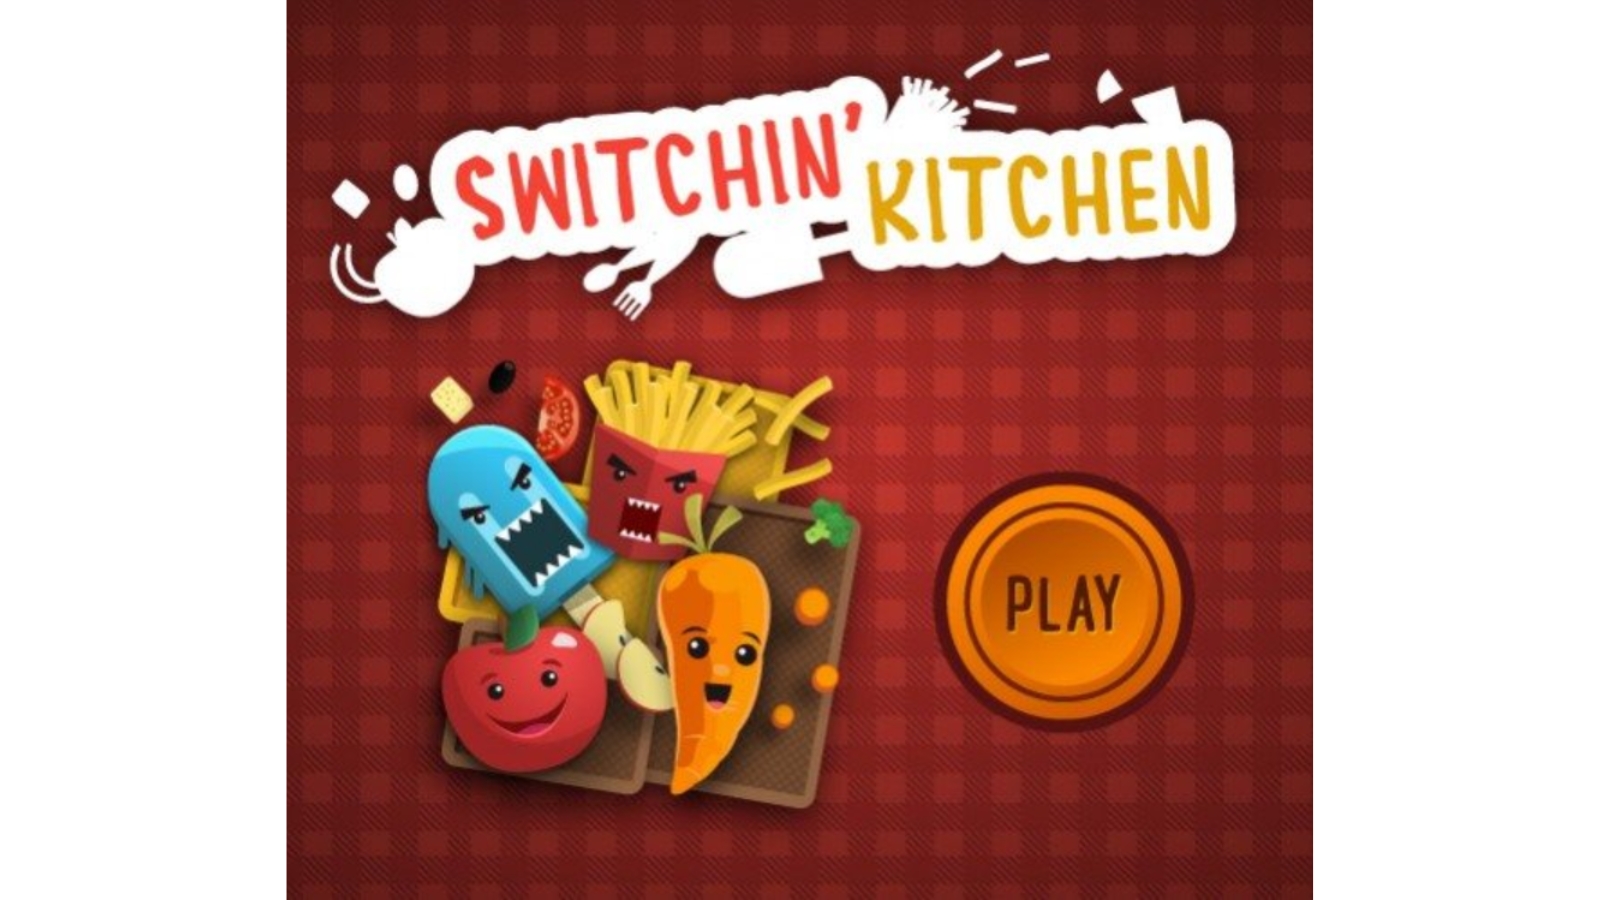 Picture of the loading screen of a video game called Switchin' Kitchen